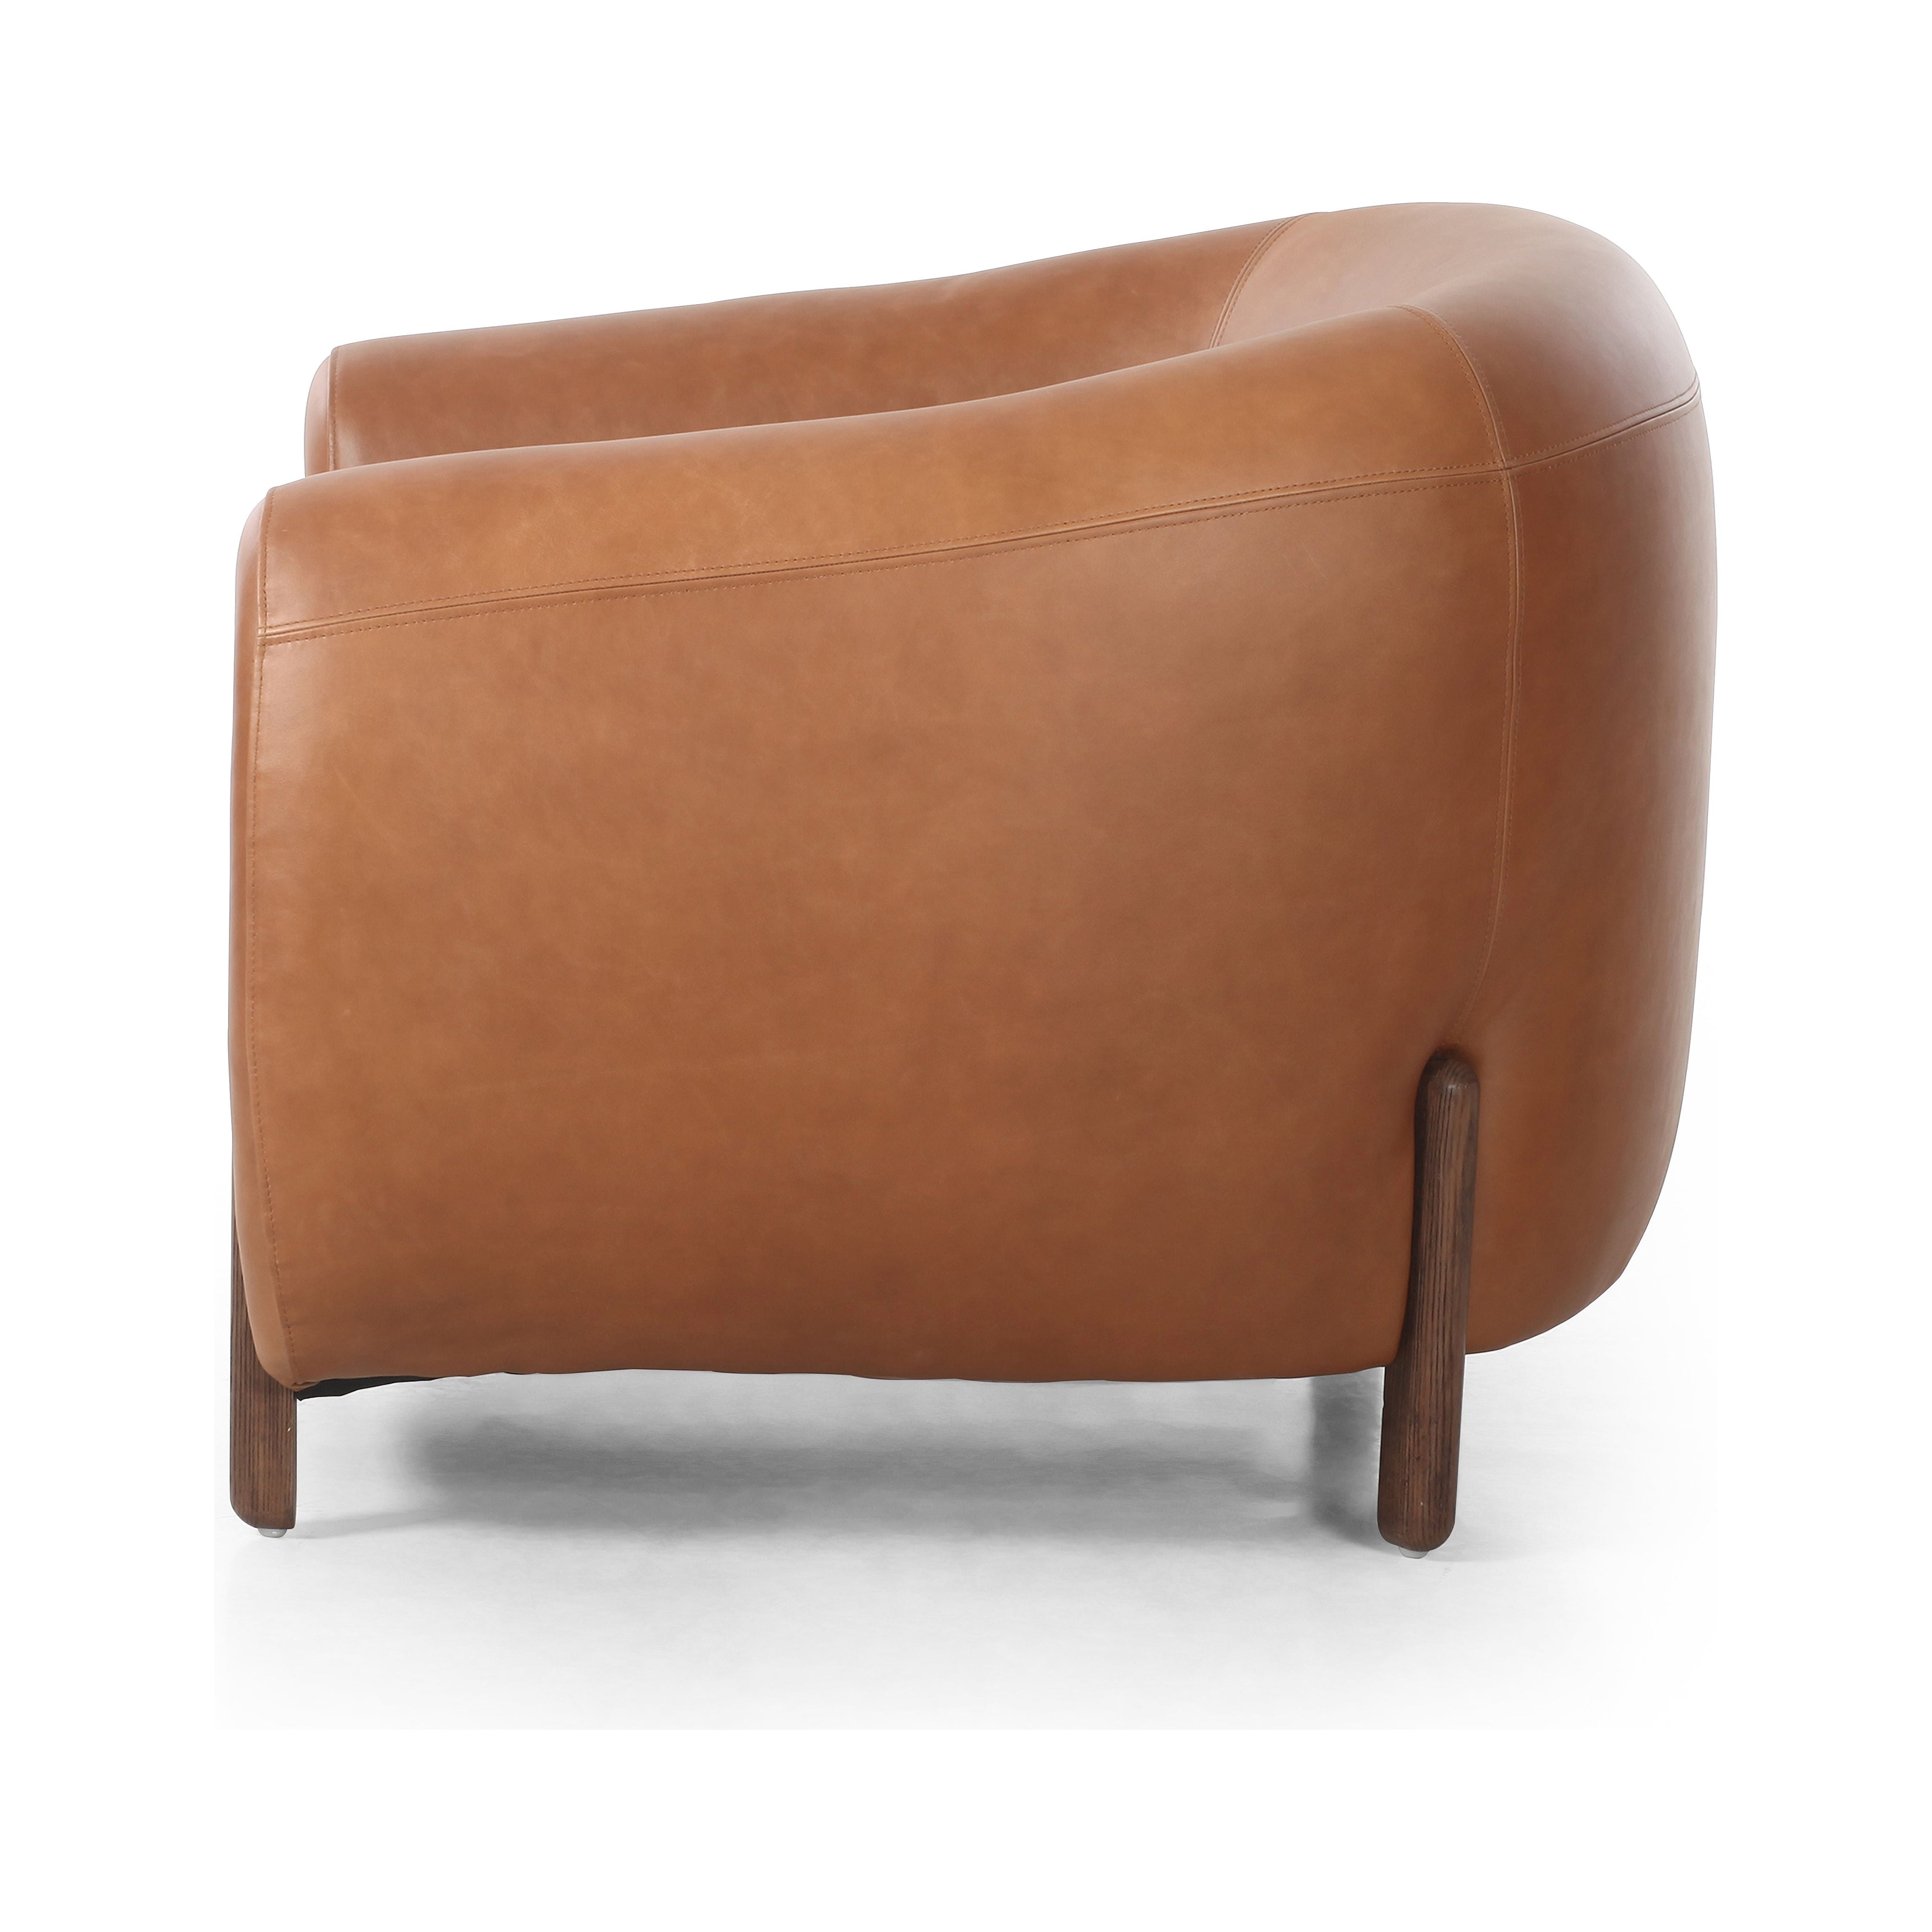 This updated take on the traditional tub chair pairs rich, camel-colored top-grain leather with solid ash to shape a sculpted seat with exaggerated depth. Amethyst Home provides interior design, new construction, custom furniture, and area rugs in the Park City metro area.